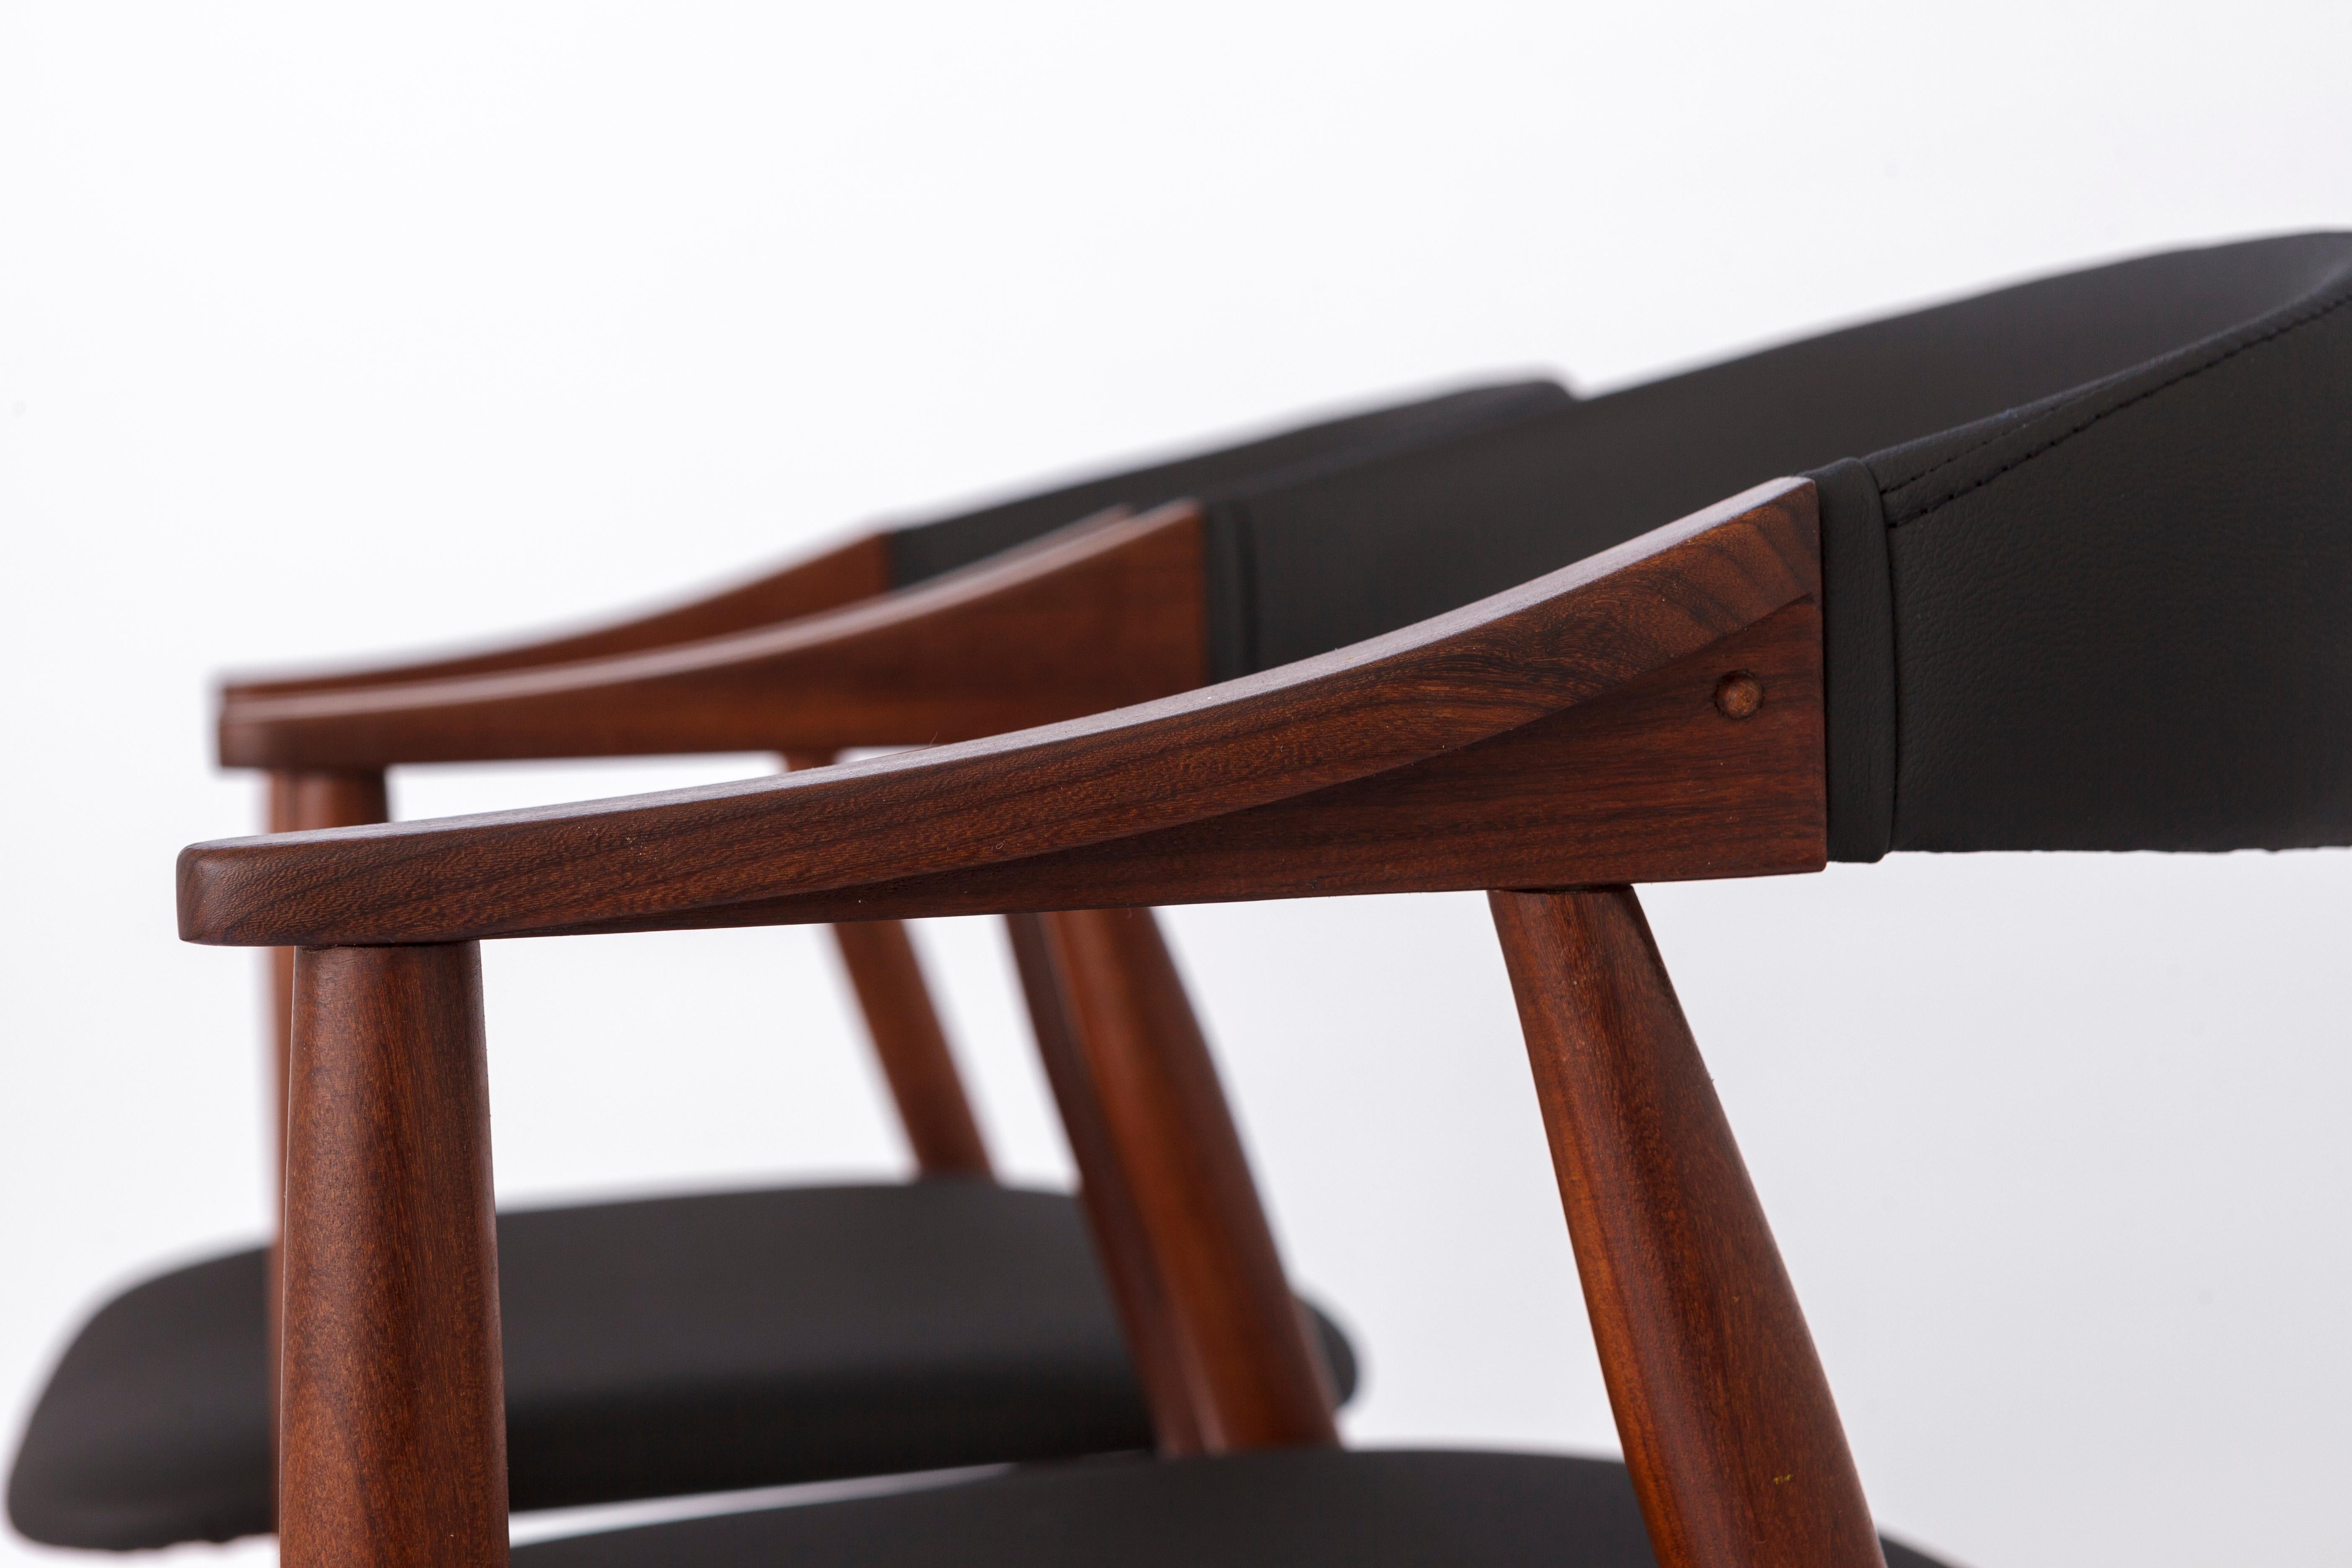 2 Vintage Chairs by Thomas Harlev, Model 213, Danish, for Farstrup, Teak, 1960s. For Sale 1